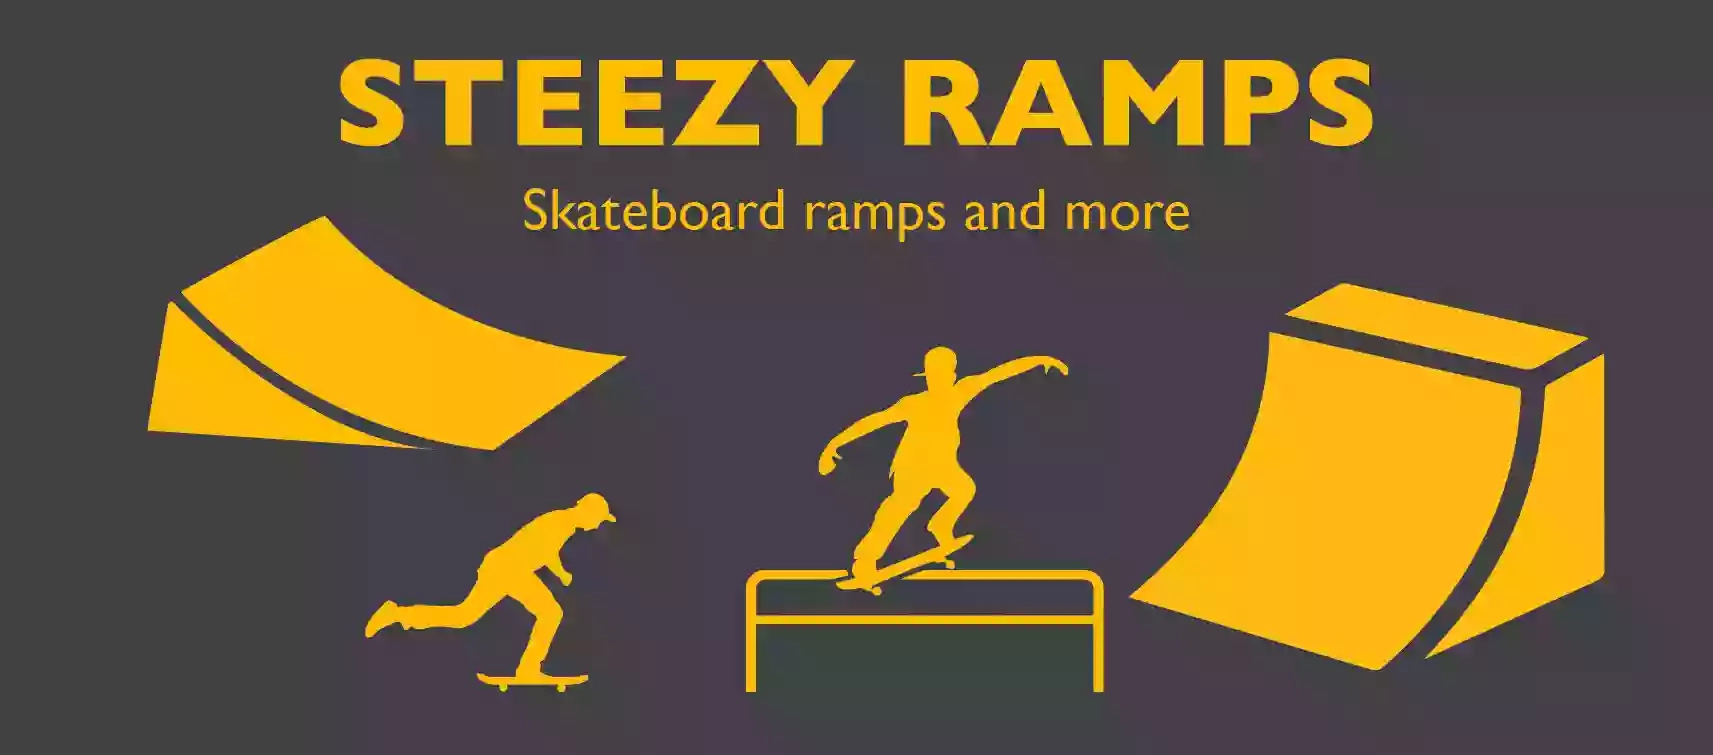 Steezy Ramps - Skateboard ramps and more